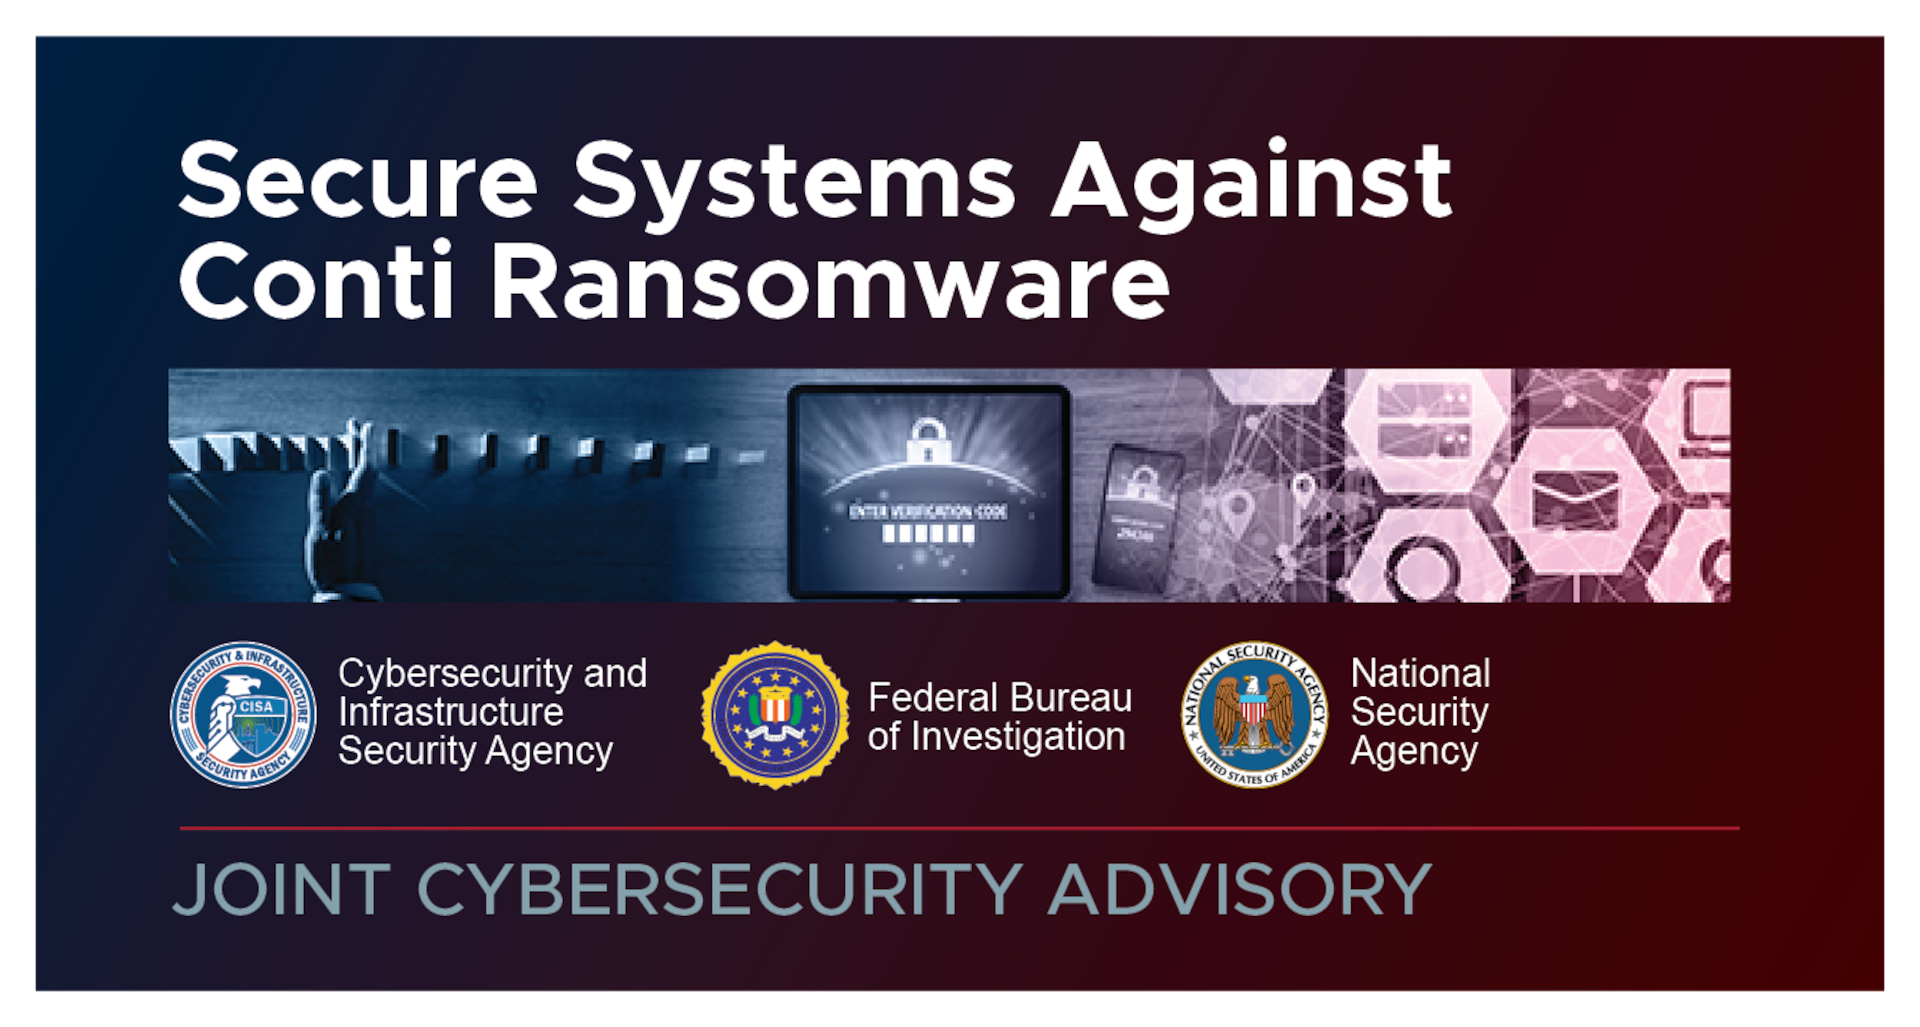 CISA, FBI, and NSA Release Conti Ransomware Advisory to Help Organizations Reduce Risk of Attack